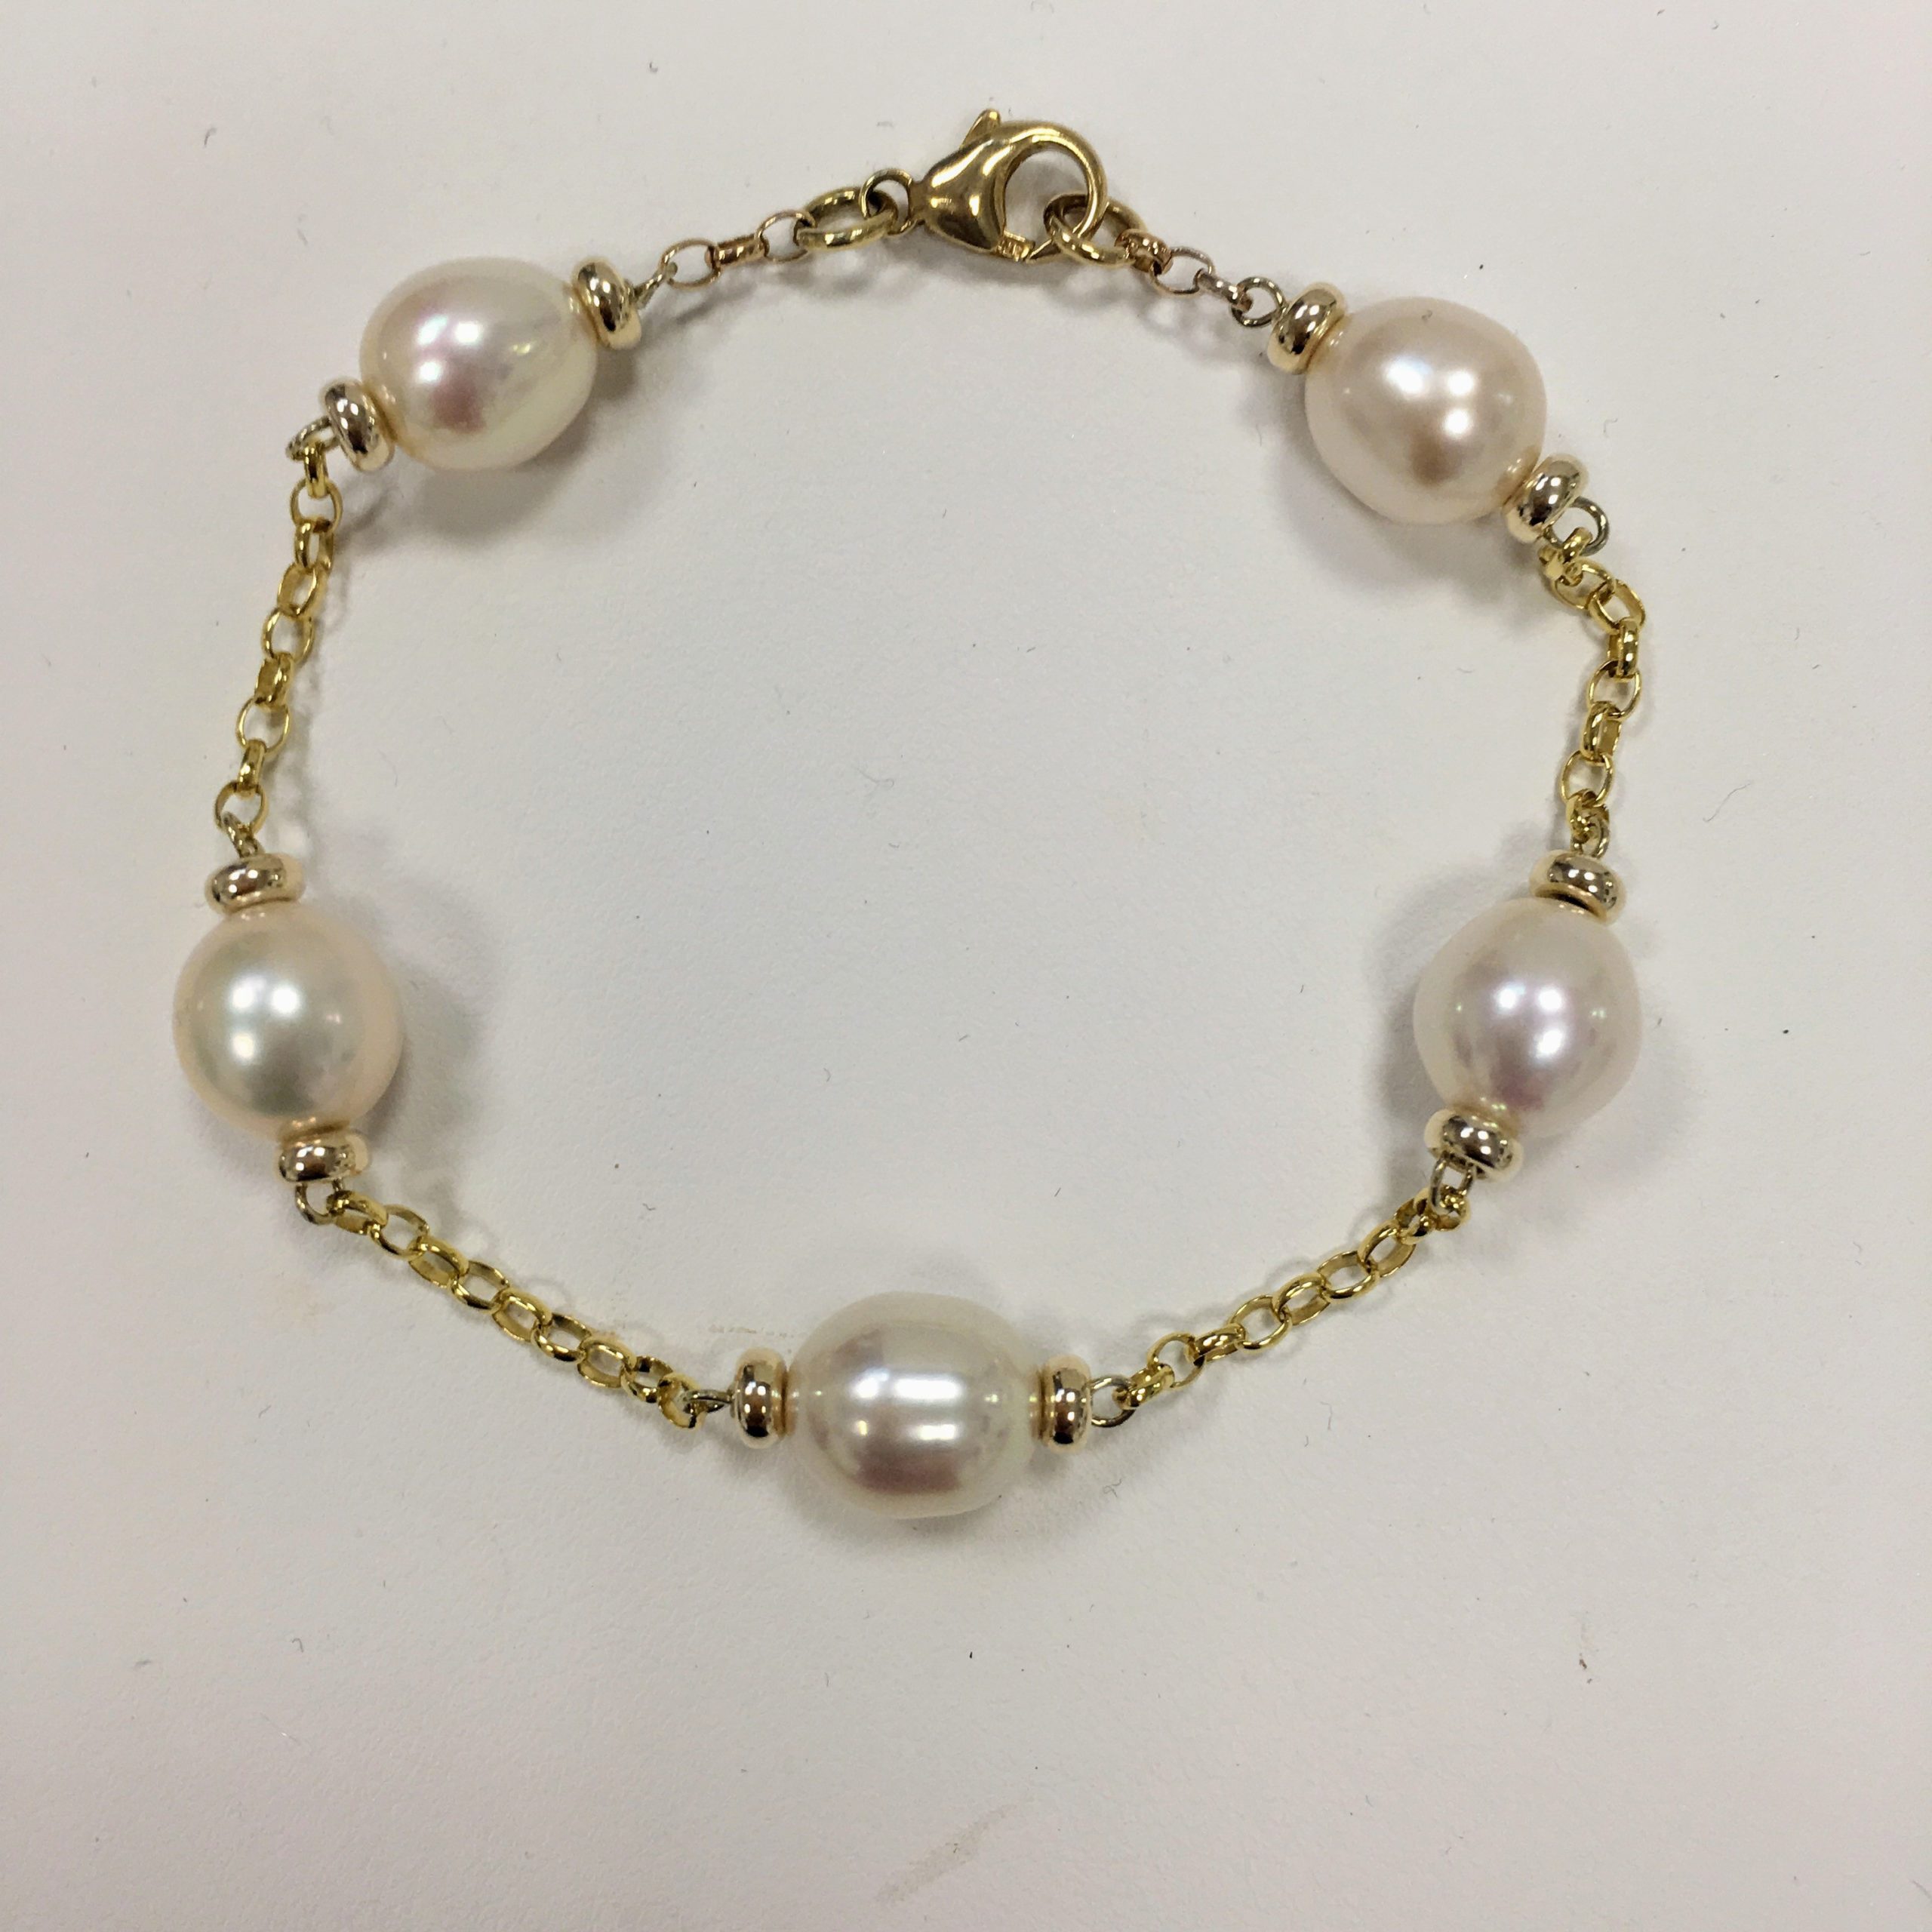 Classic Mary Berry bracelet - Harriet Whinney Pearls